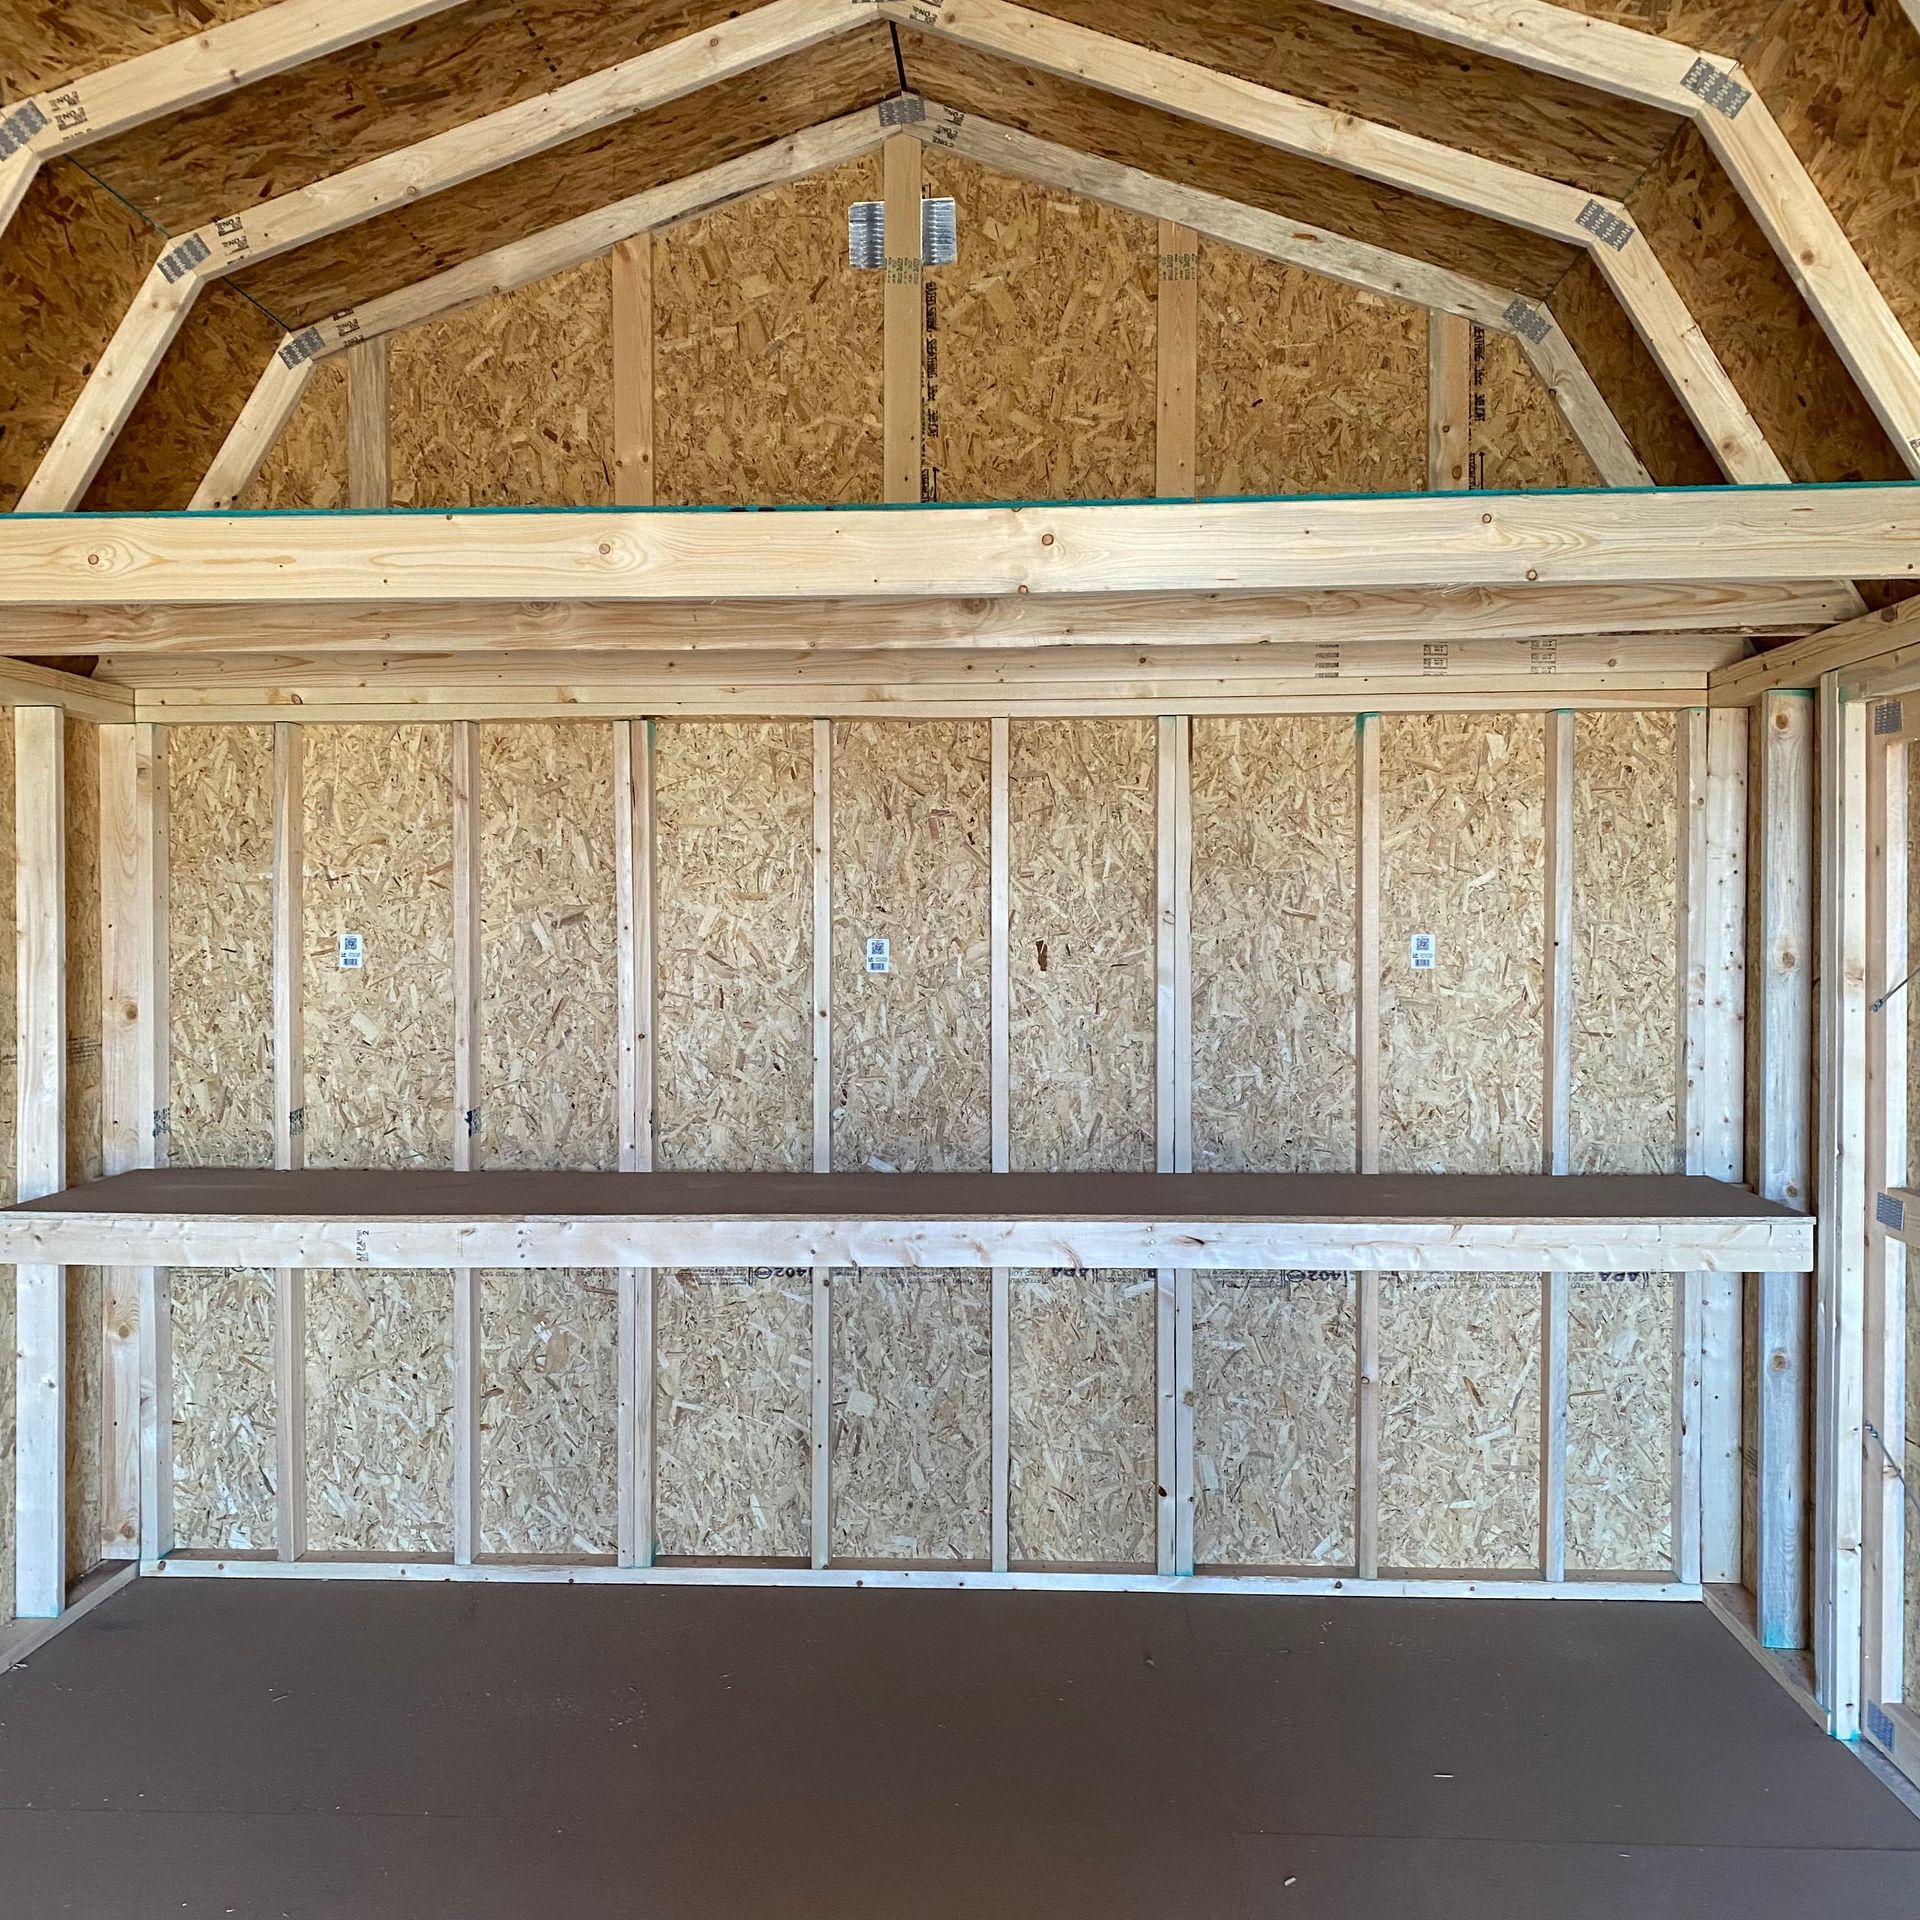 Interior of 12x20 Portable Barn with work bench shown